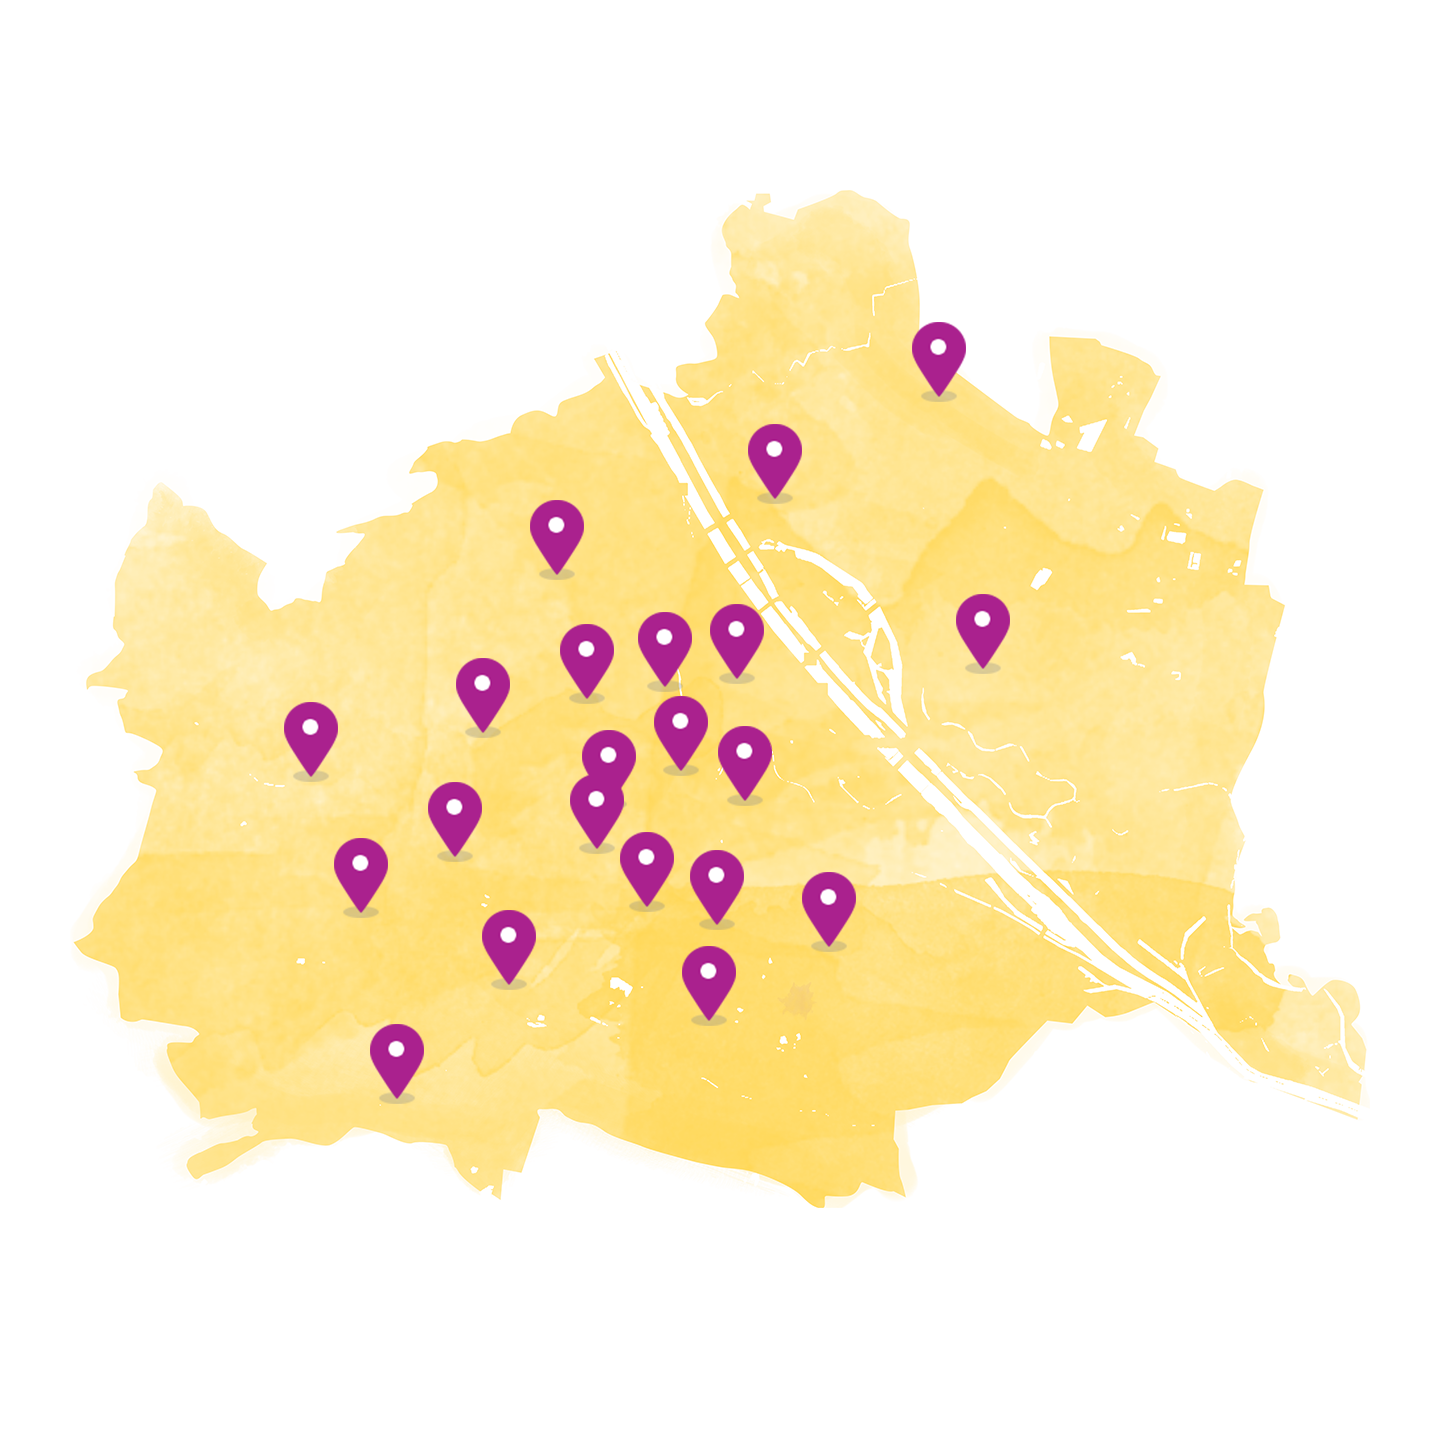 evang-wien.at – illustrated map of curch locations